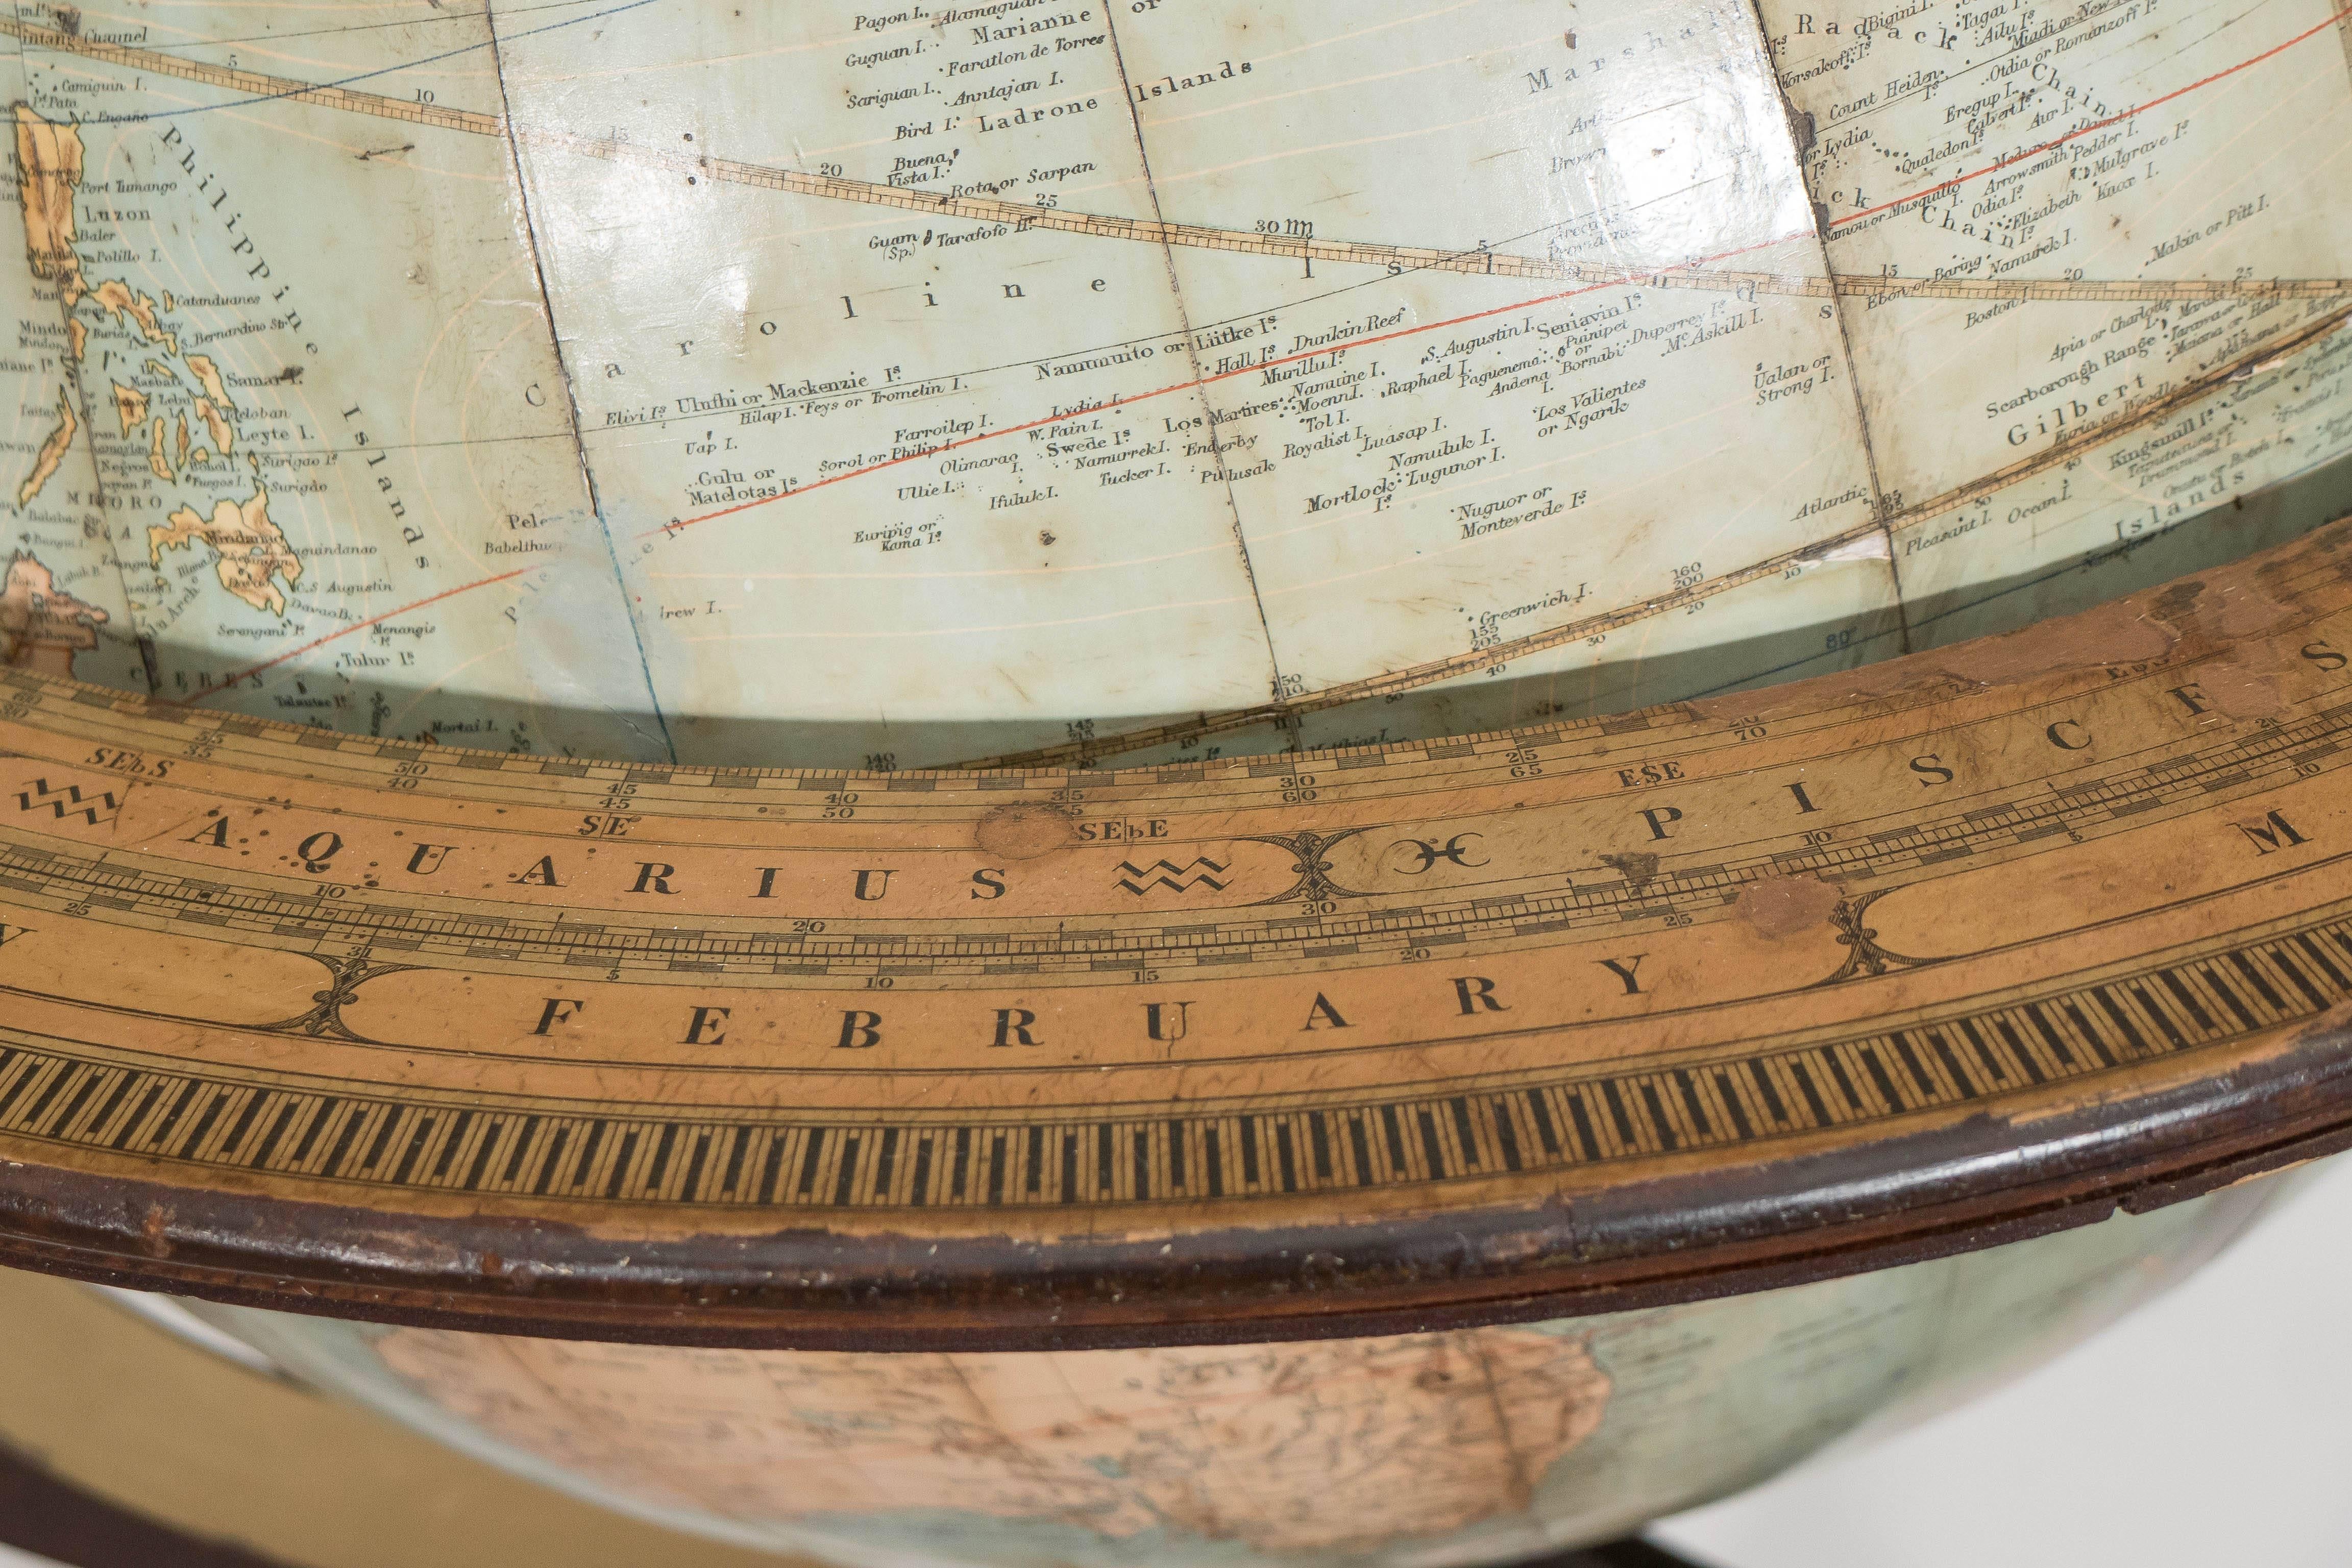 Donohue & Henneberry Terrestrial Globe on Stand 4